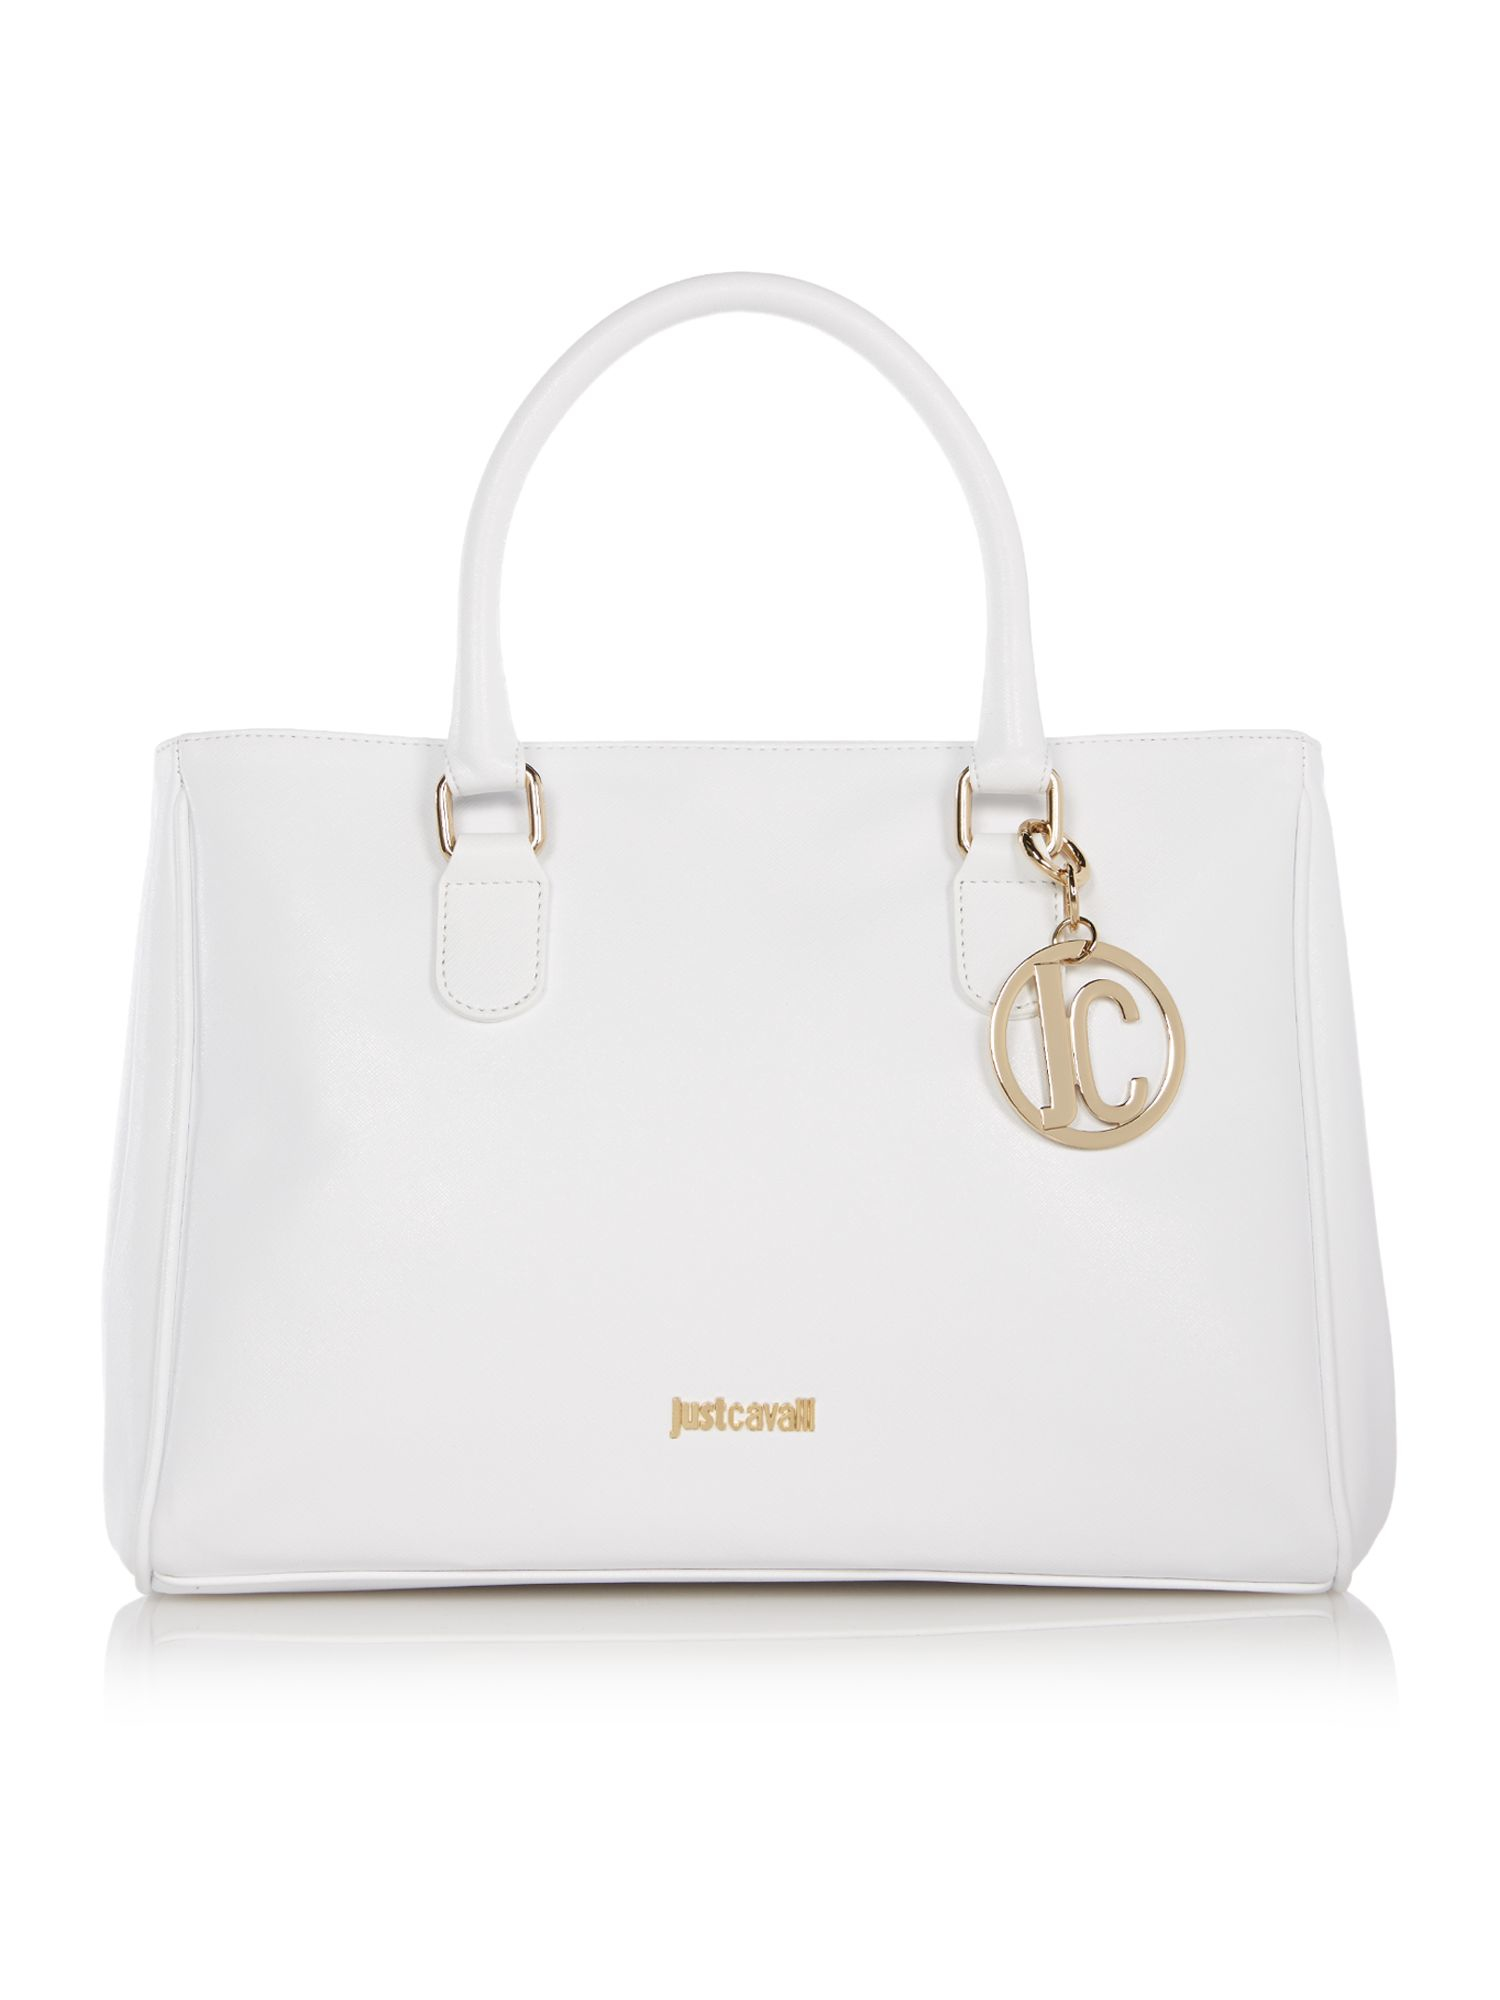 Just cavalli White Small Tote Bag in White | Lyst